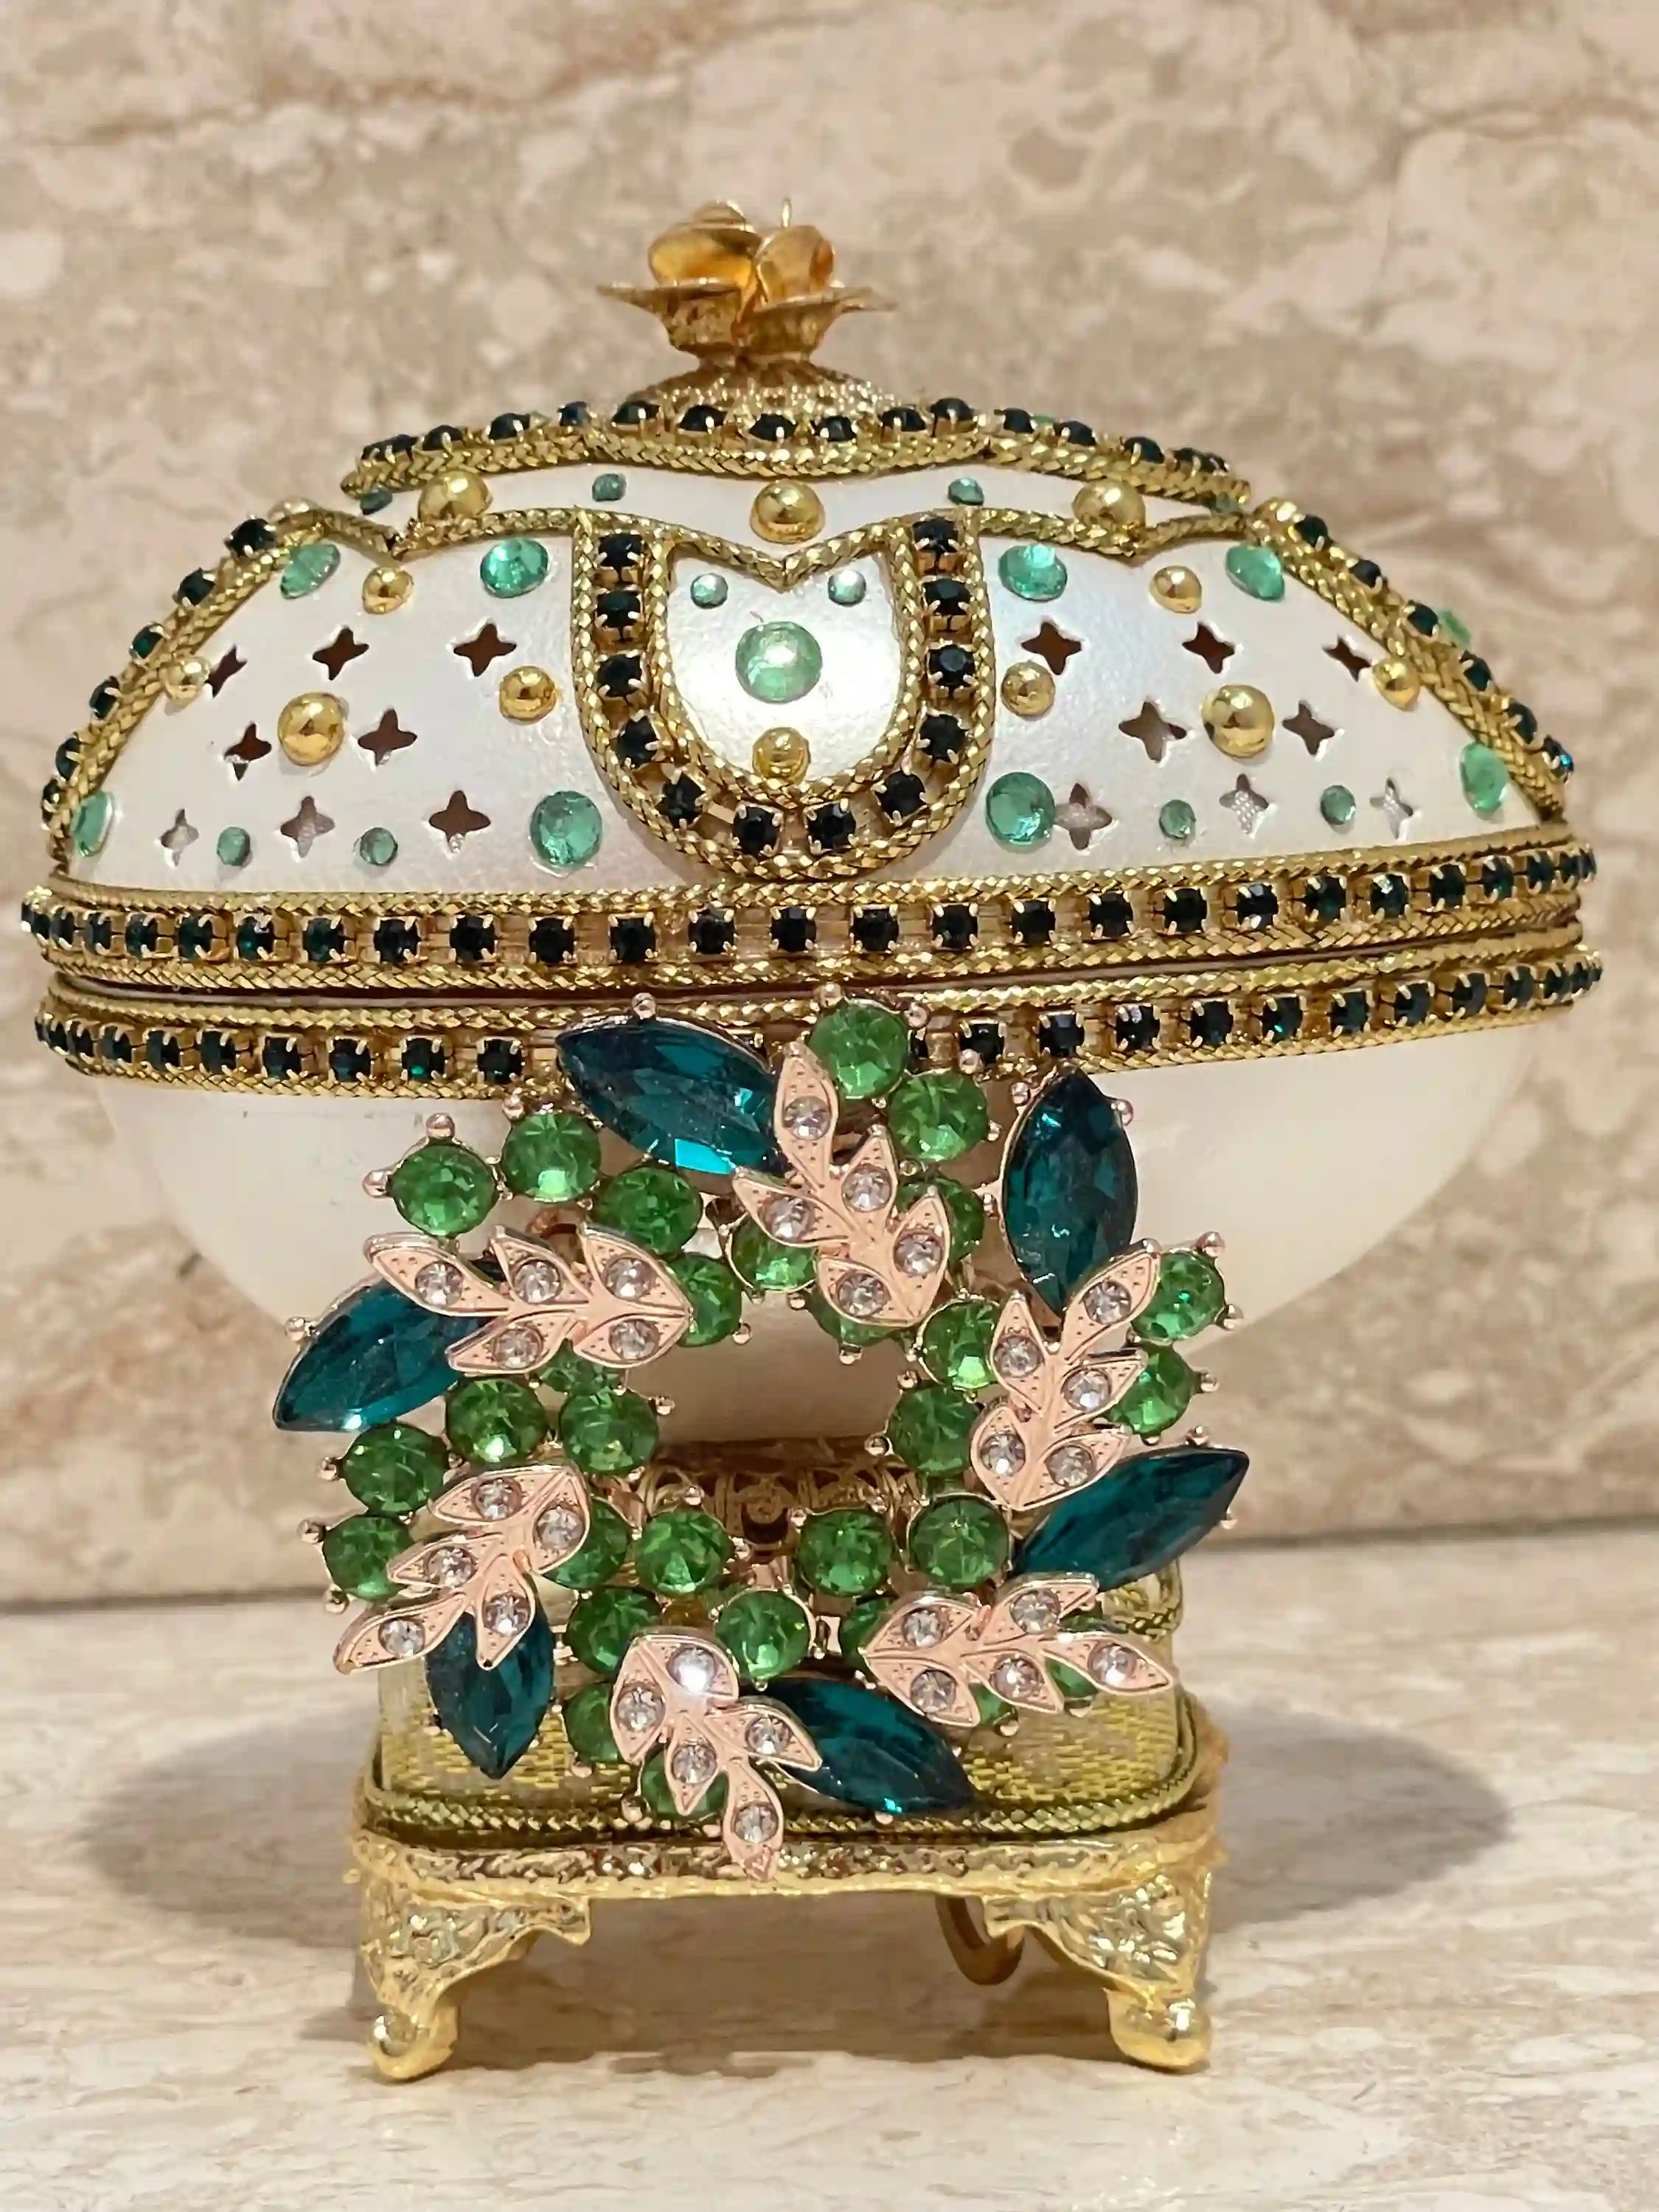 ONE OF A KIND - Antique Faberge egg style .Egg + Faberge jewelry - Faberge Egg Music Box - Decorative Faberge Egg - Crown Regal Collection 